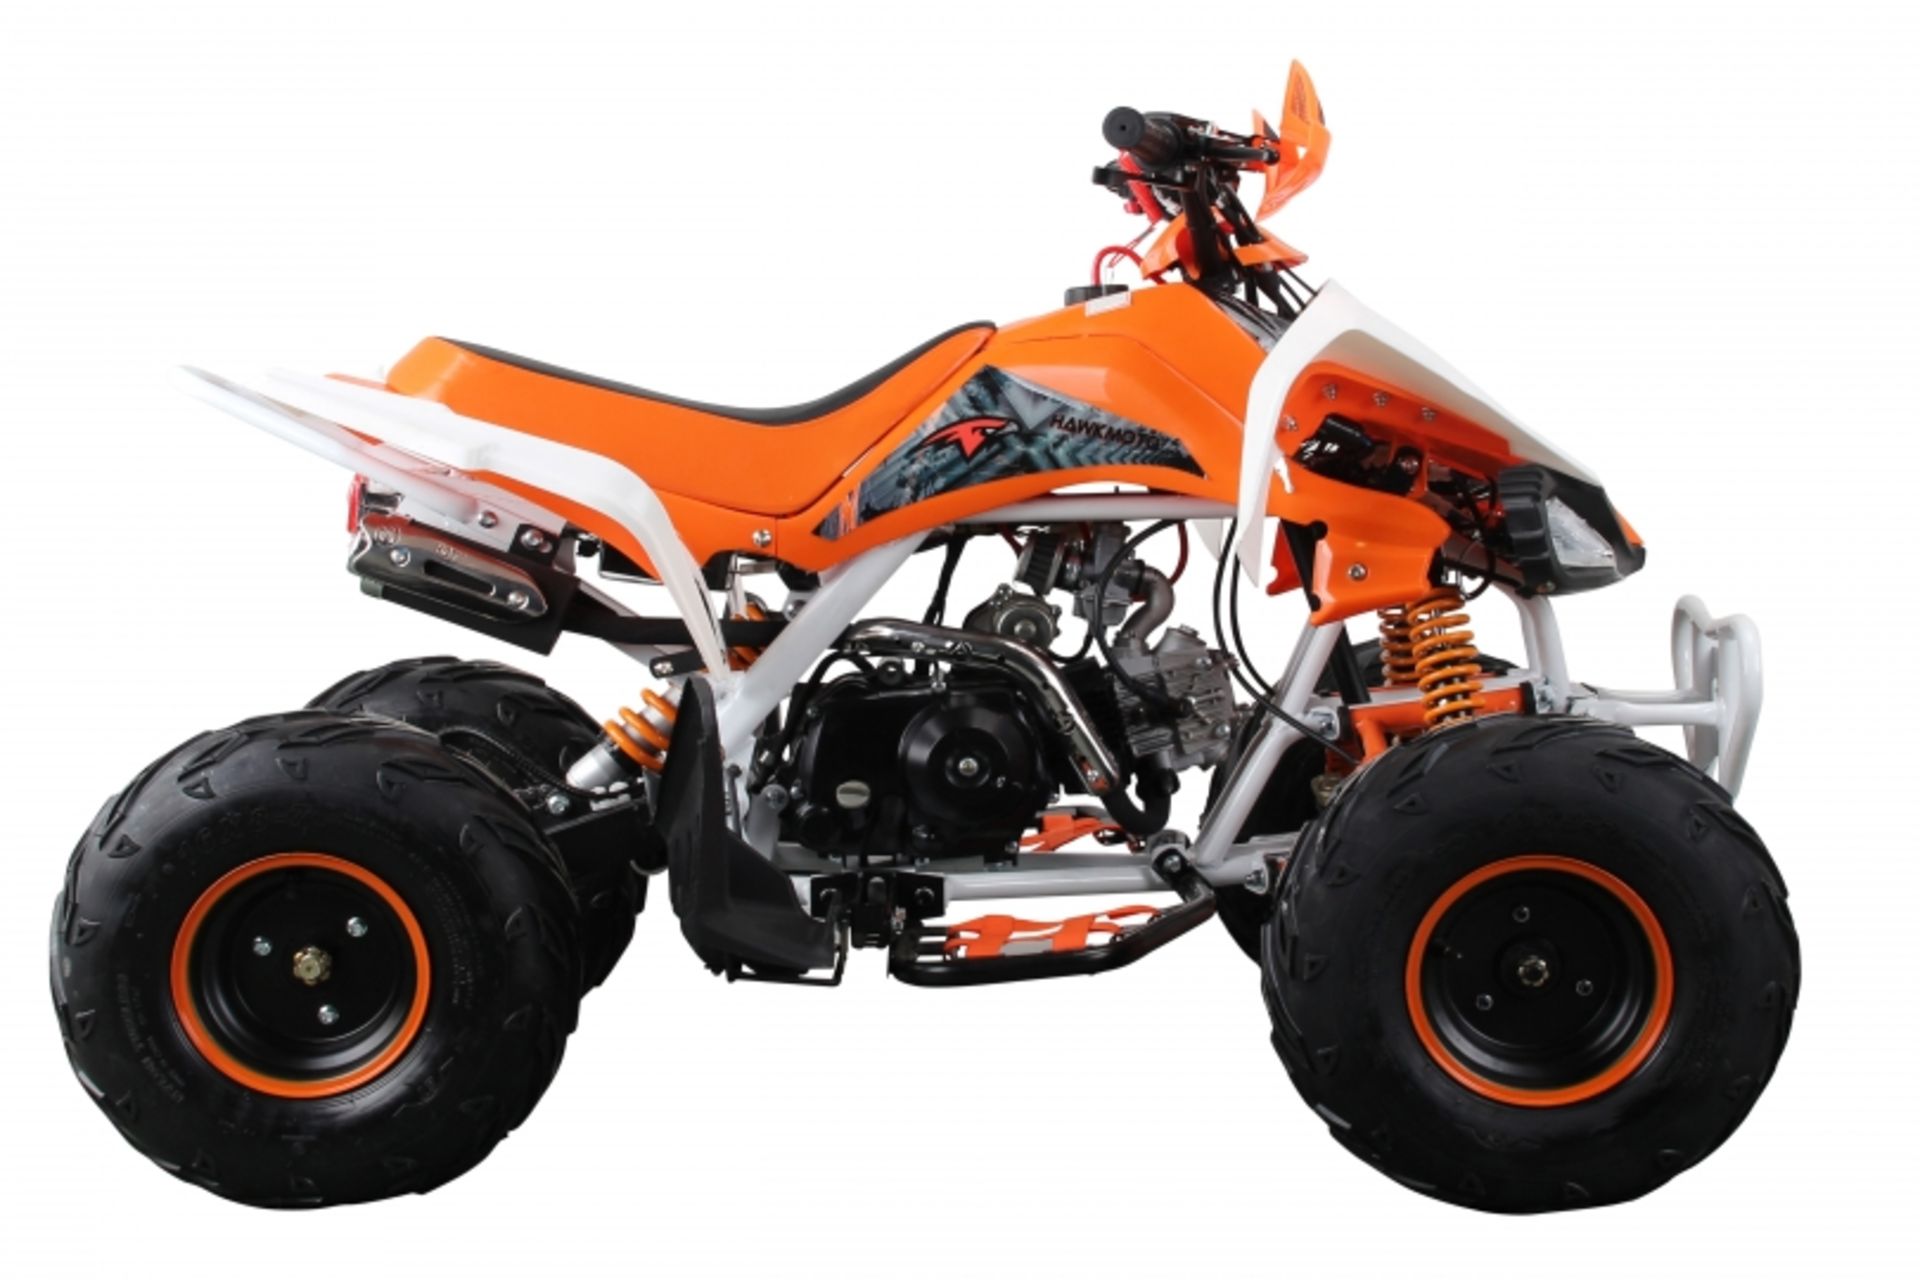 V Brand New 125cc Interceptor SV2 4 Stroke Quad Bike With Reverse Gear - Double Front Suspension/ - Image 4 of 4